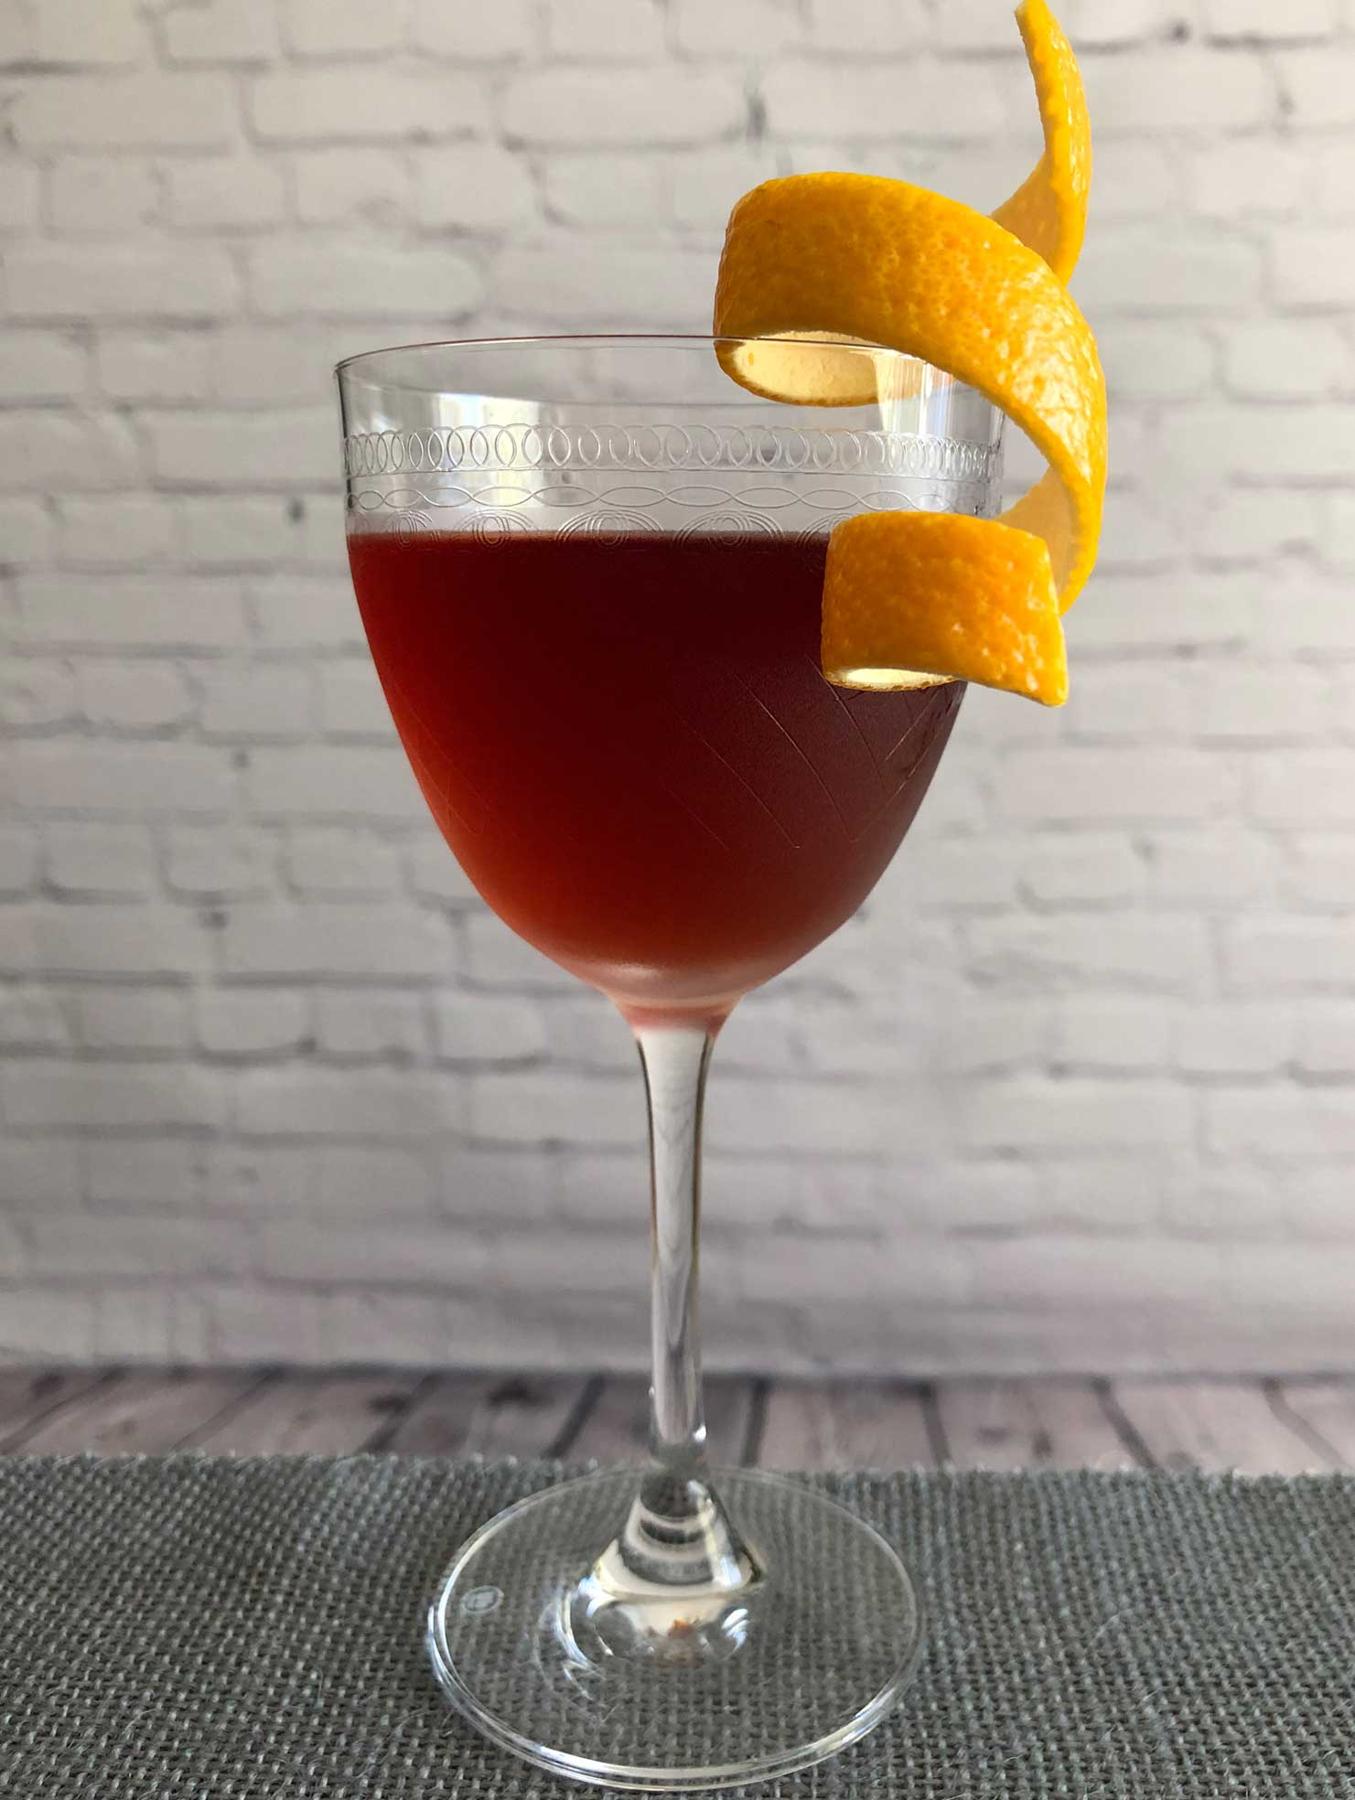 An example of the Fair Thee Well, the mixed drink (drink), by Brian Means, Fifth Floor, San Francisco, featuring bourbon whiskey, Cocchi Barolo Chinato, Pierre Ferrand Dry Curaçao, and orange twist; photo by Lee Edwards